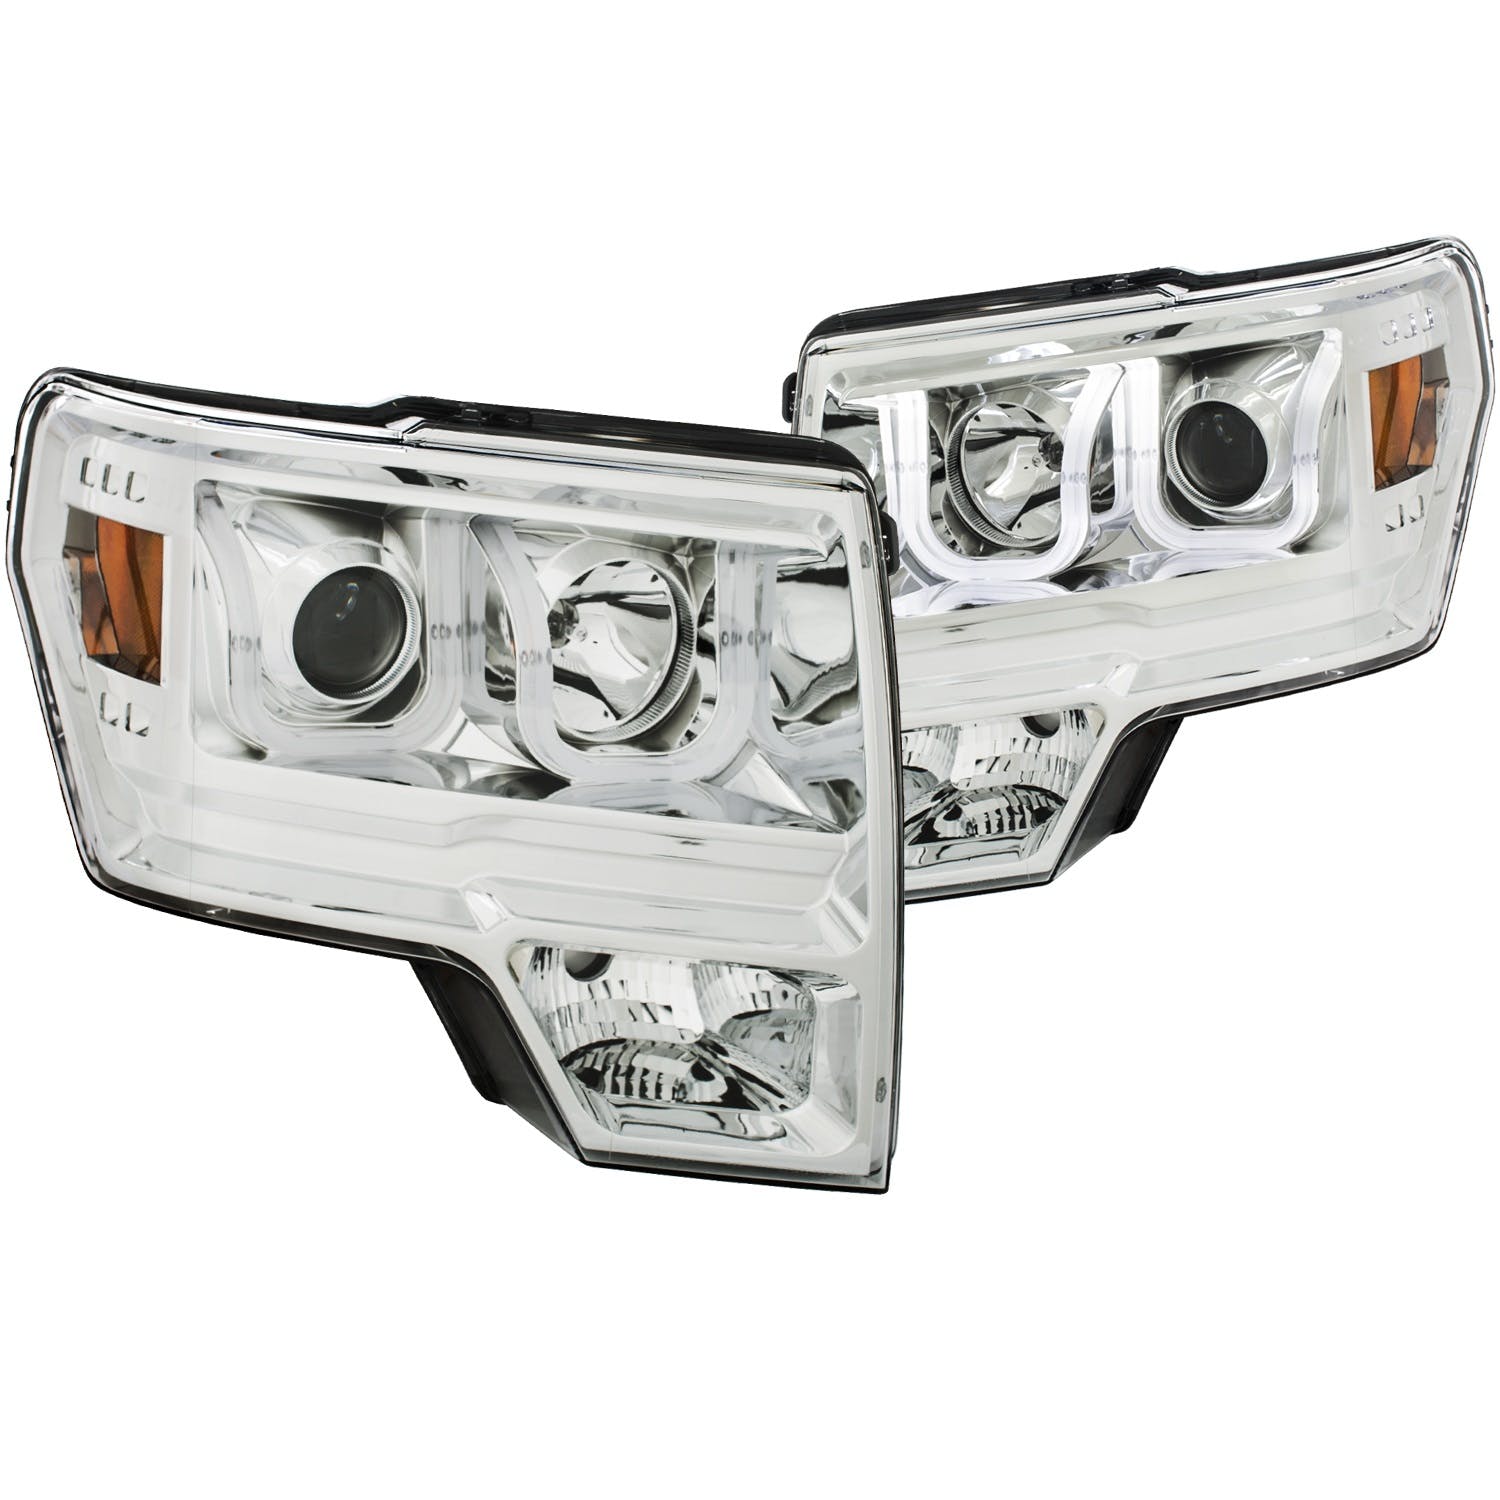 AnzoUSA 111352 Projector Headlights with U-Bar Chrome Amber (HID type) (without HID kit)